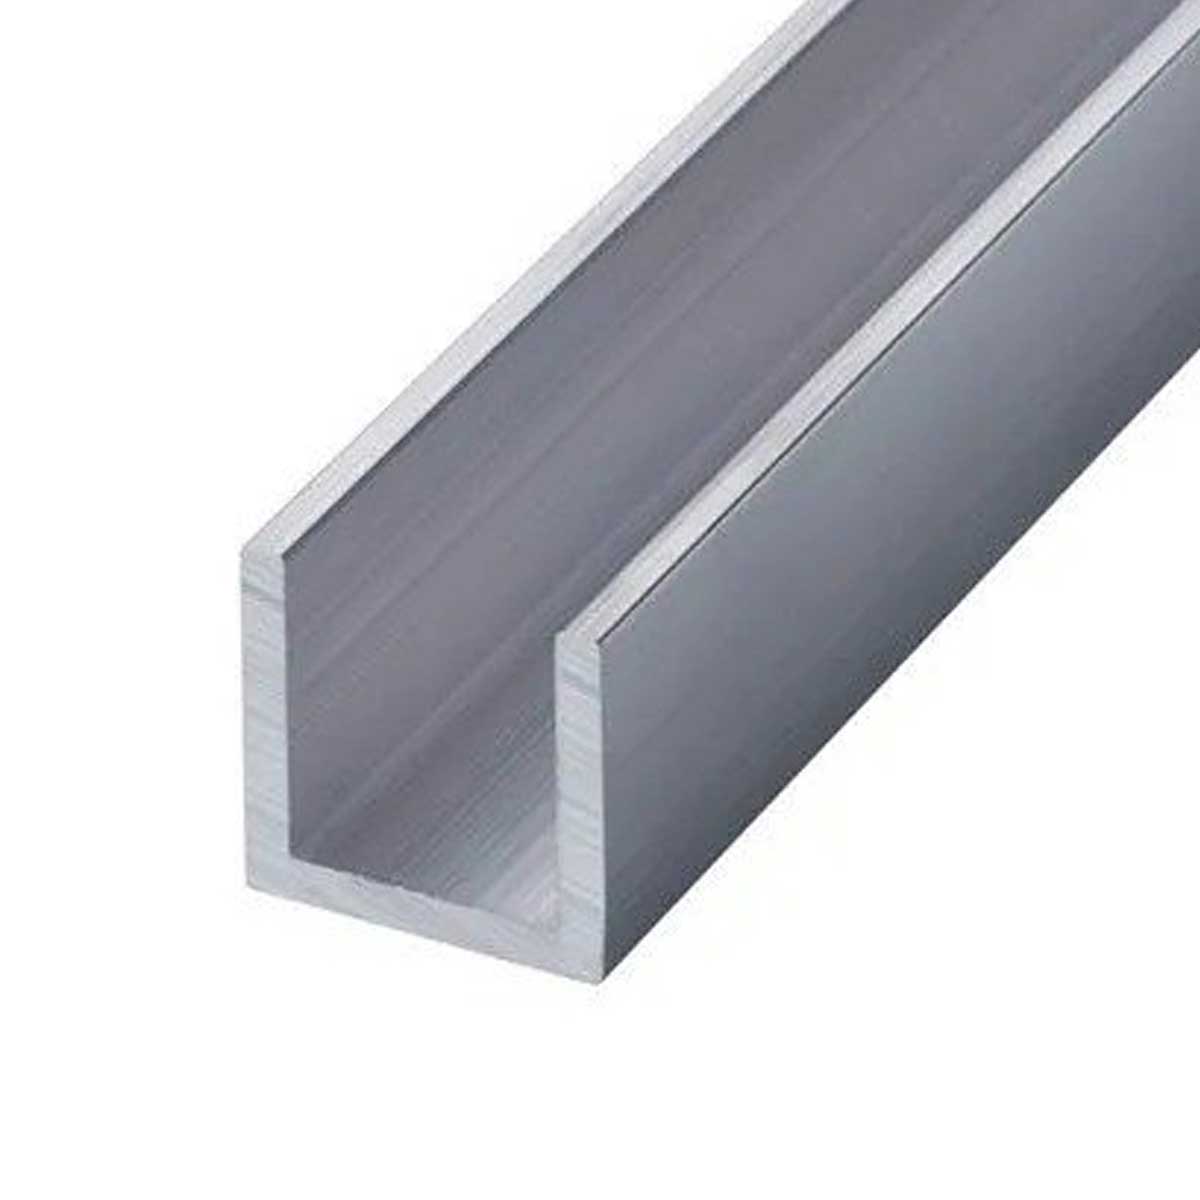 Aluminium C Channel For Construction Manufacturers, Suppliers in Nadiad